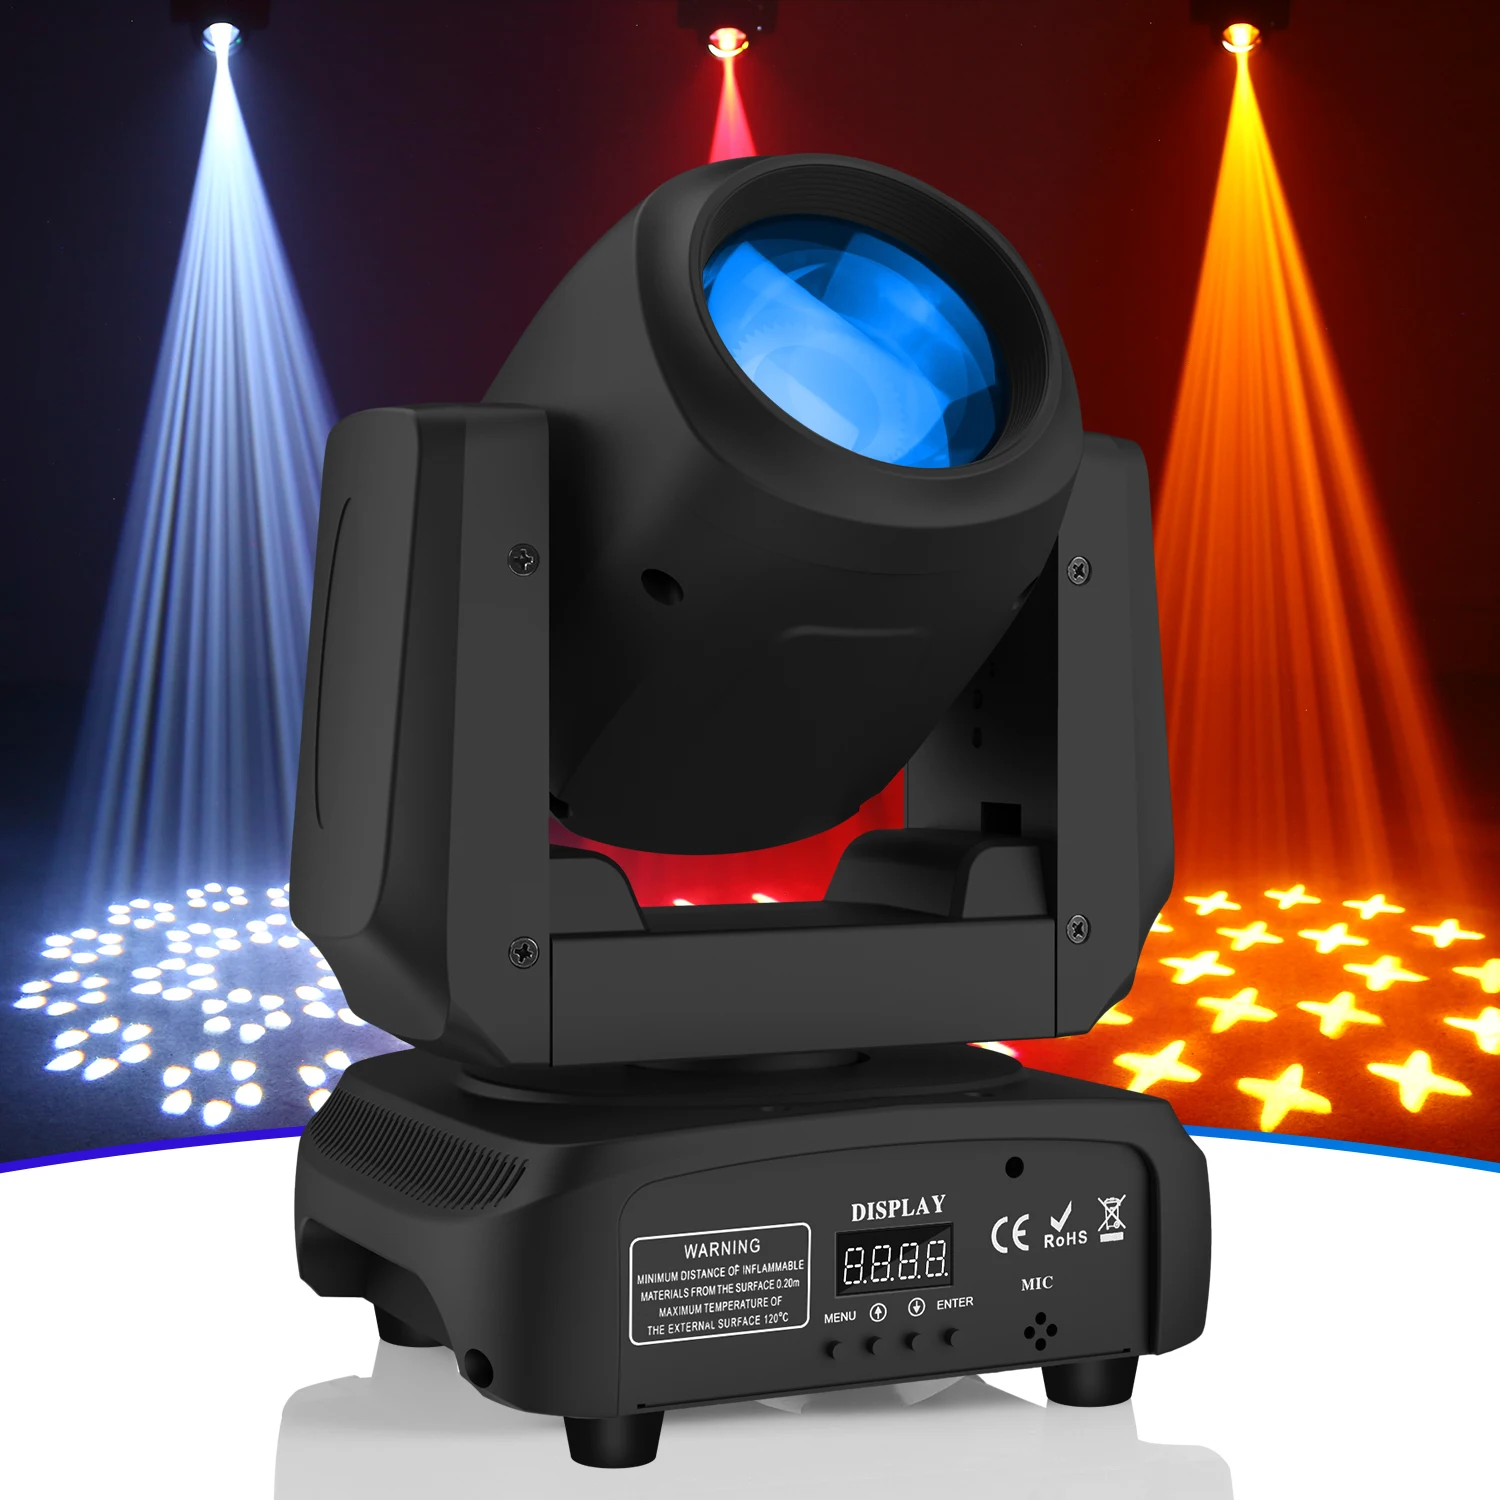 

LED DMX Gobo Moving Head Spot Beam Light for Club Dj Stage Lighting Party Disco Wedding Event 120W Moving Head Stage Lighting